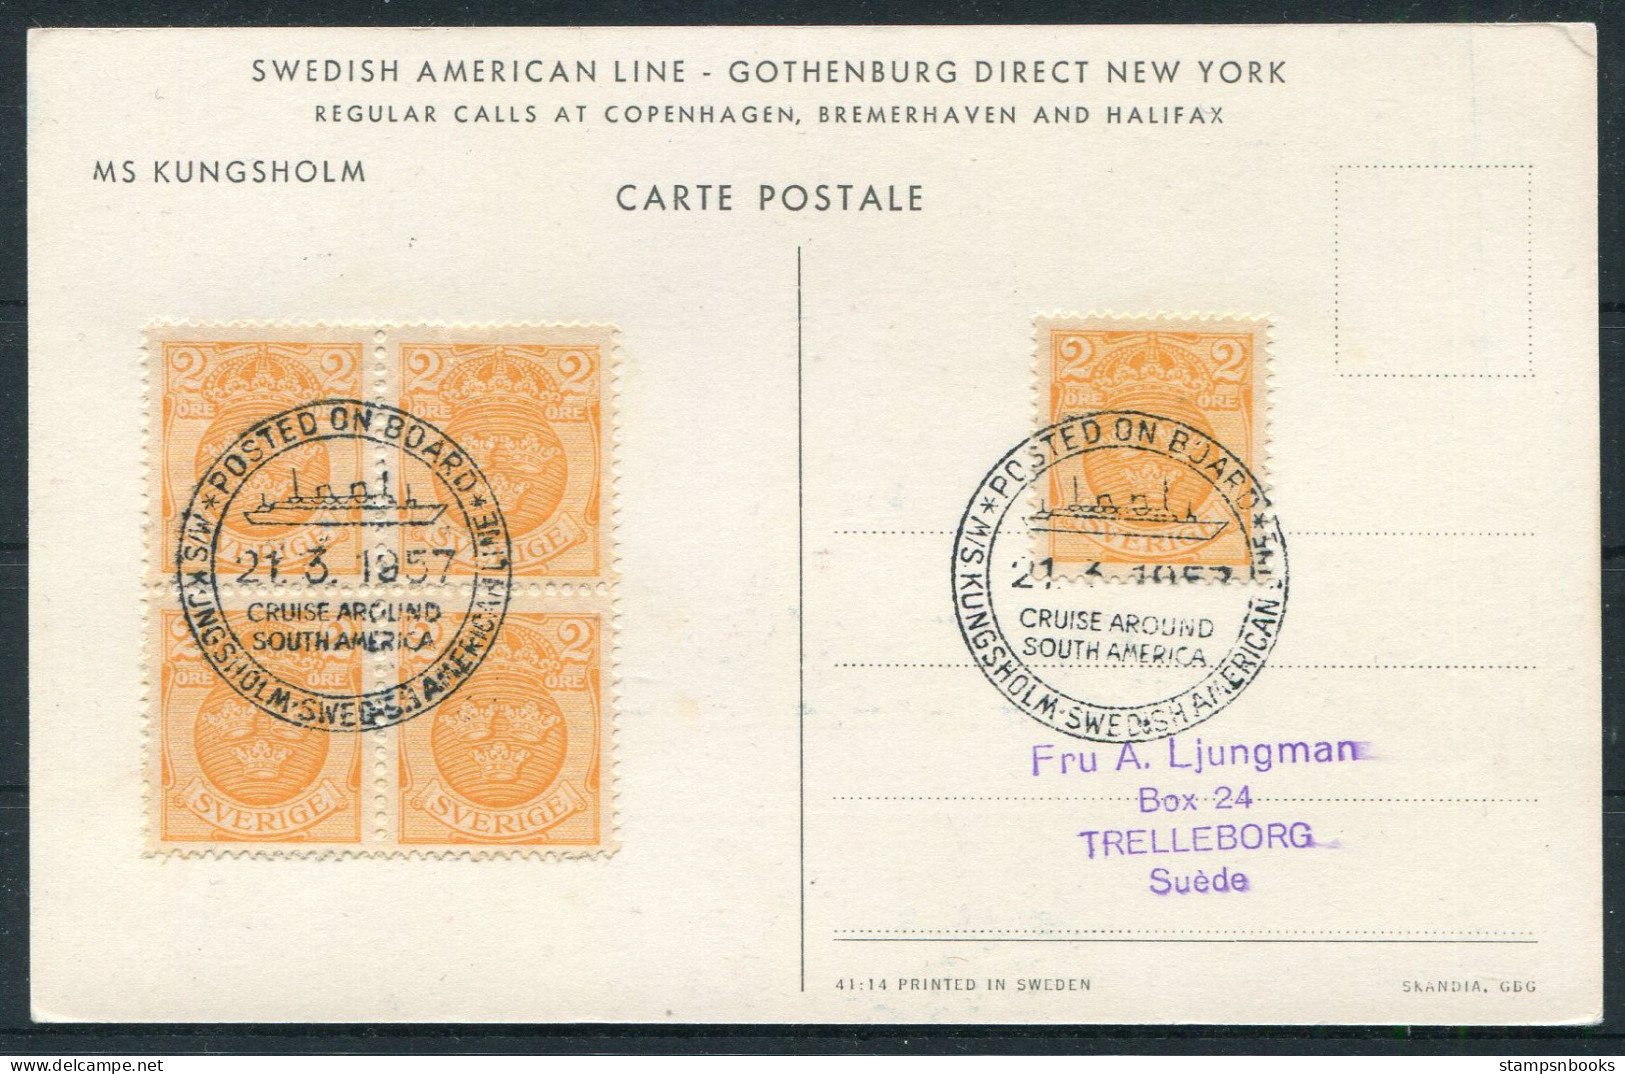 1957 Sweden Swedish American Line Postcard MS GRIPSHOLM "Cruise Around South America"  - Covers & Documents